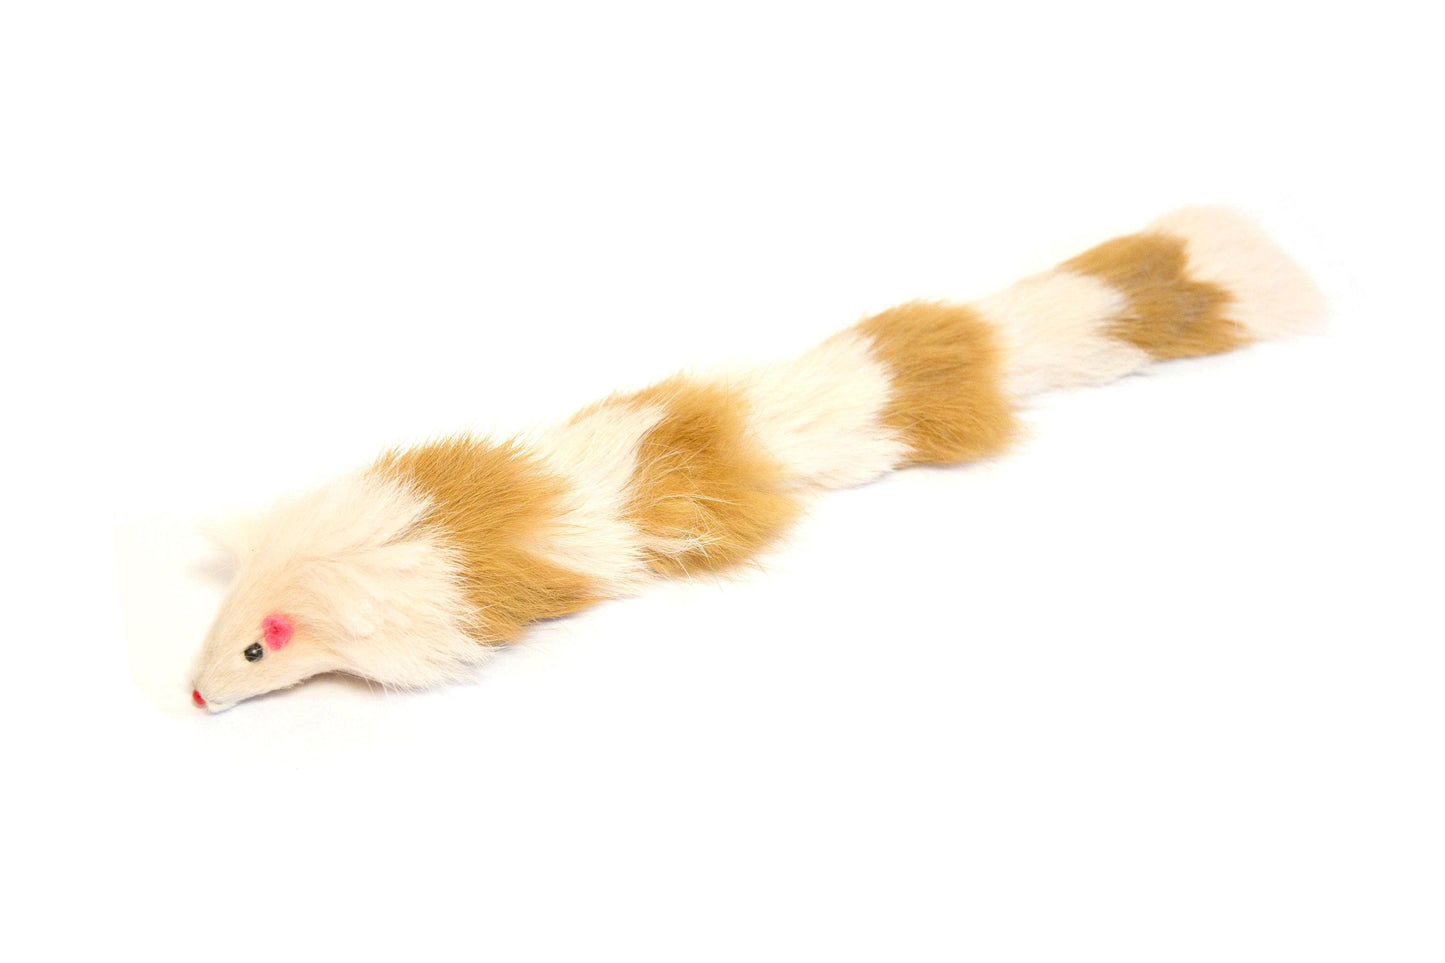 Set of Two Fur Weasel Toys (one Brown/White and one Multi-colored)